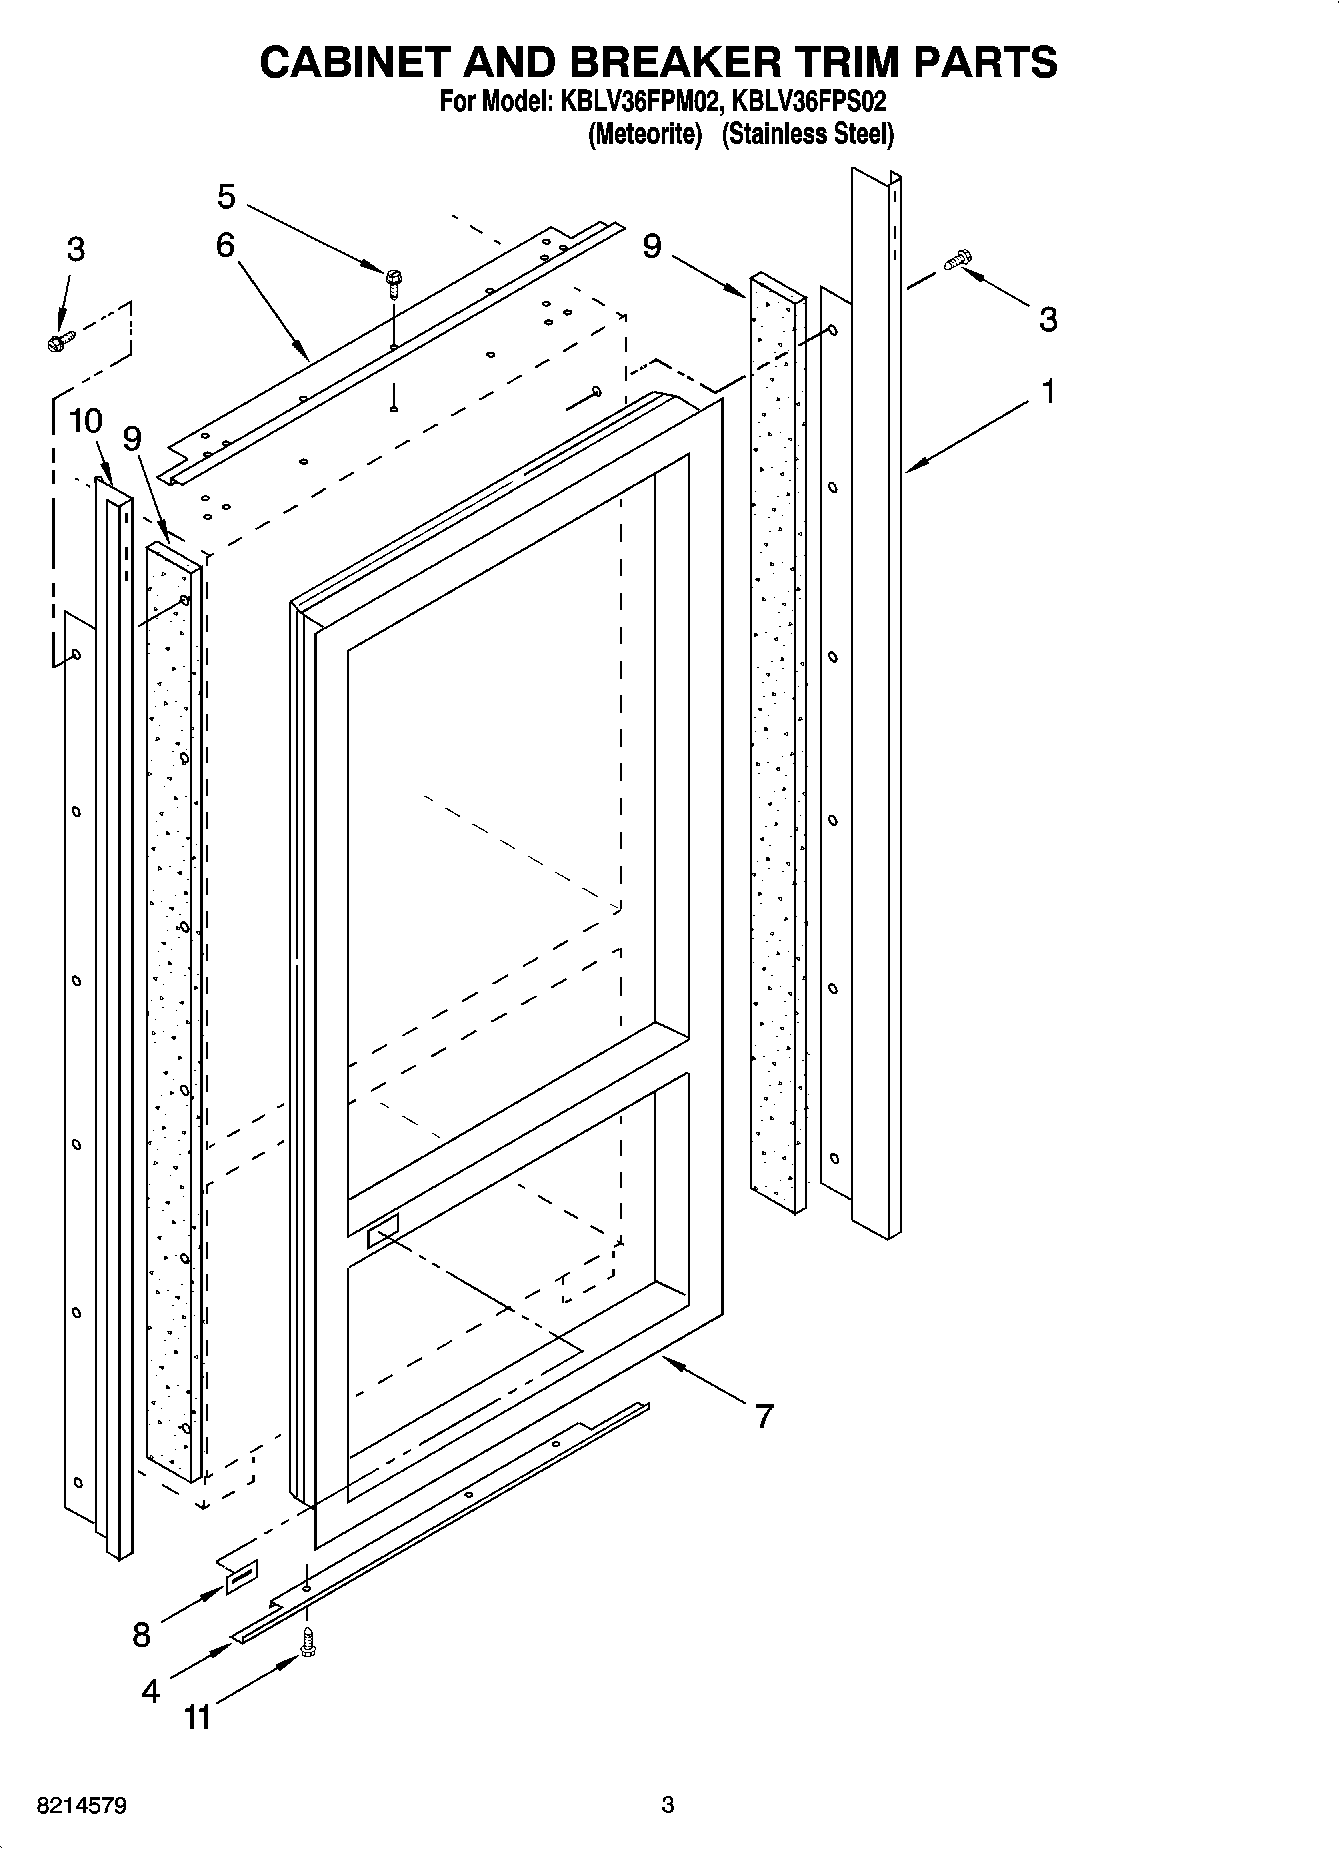 02 - CABINET AND BREAKER TRIM PARTS